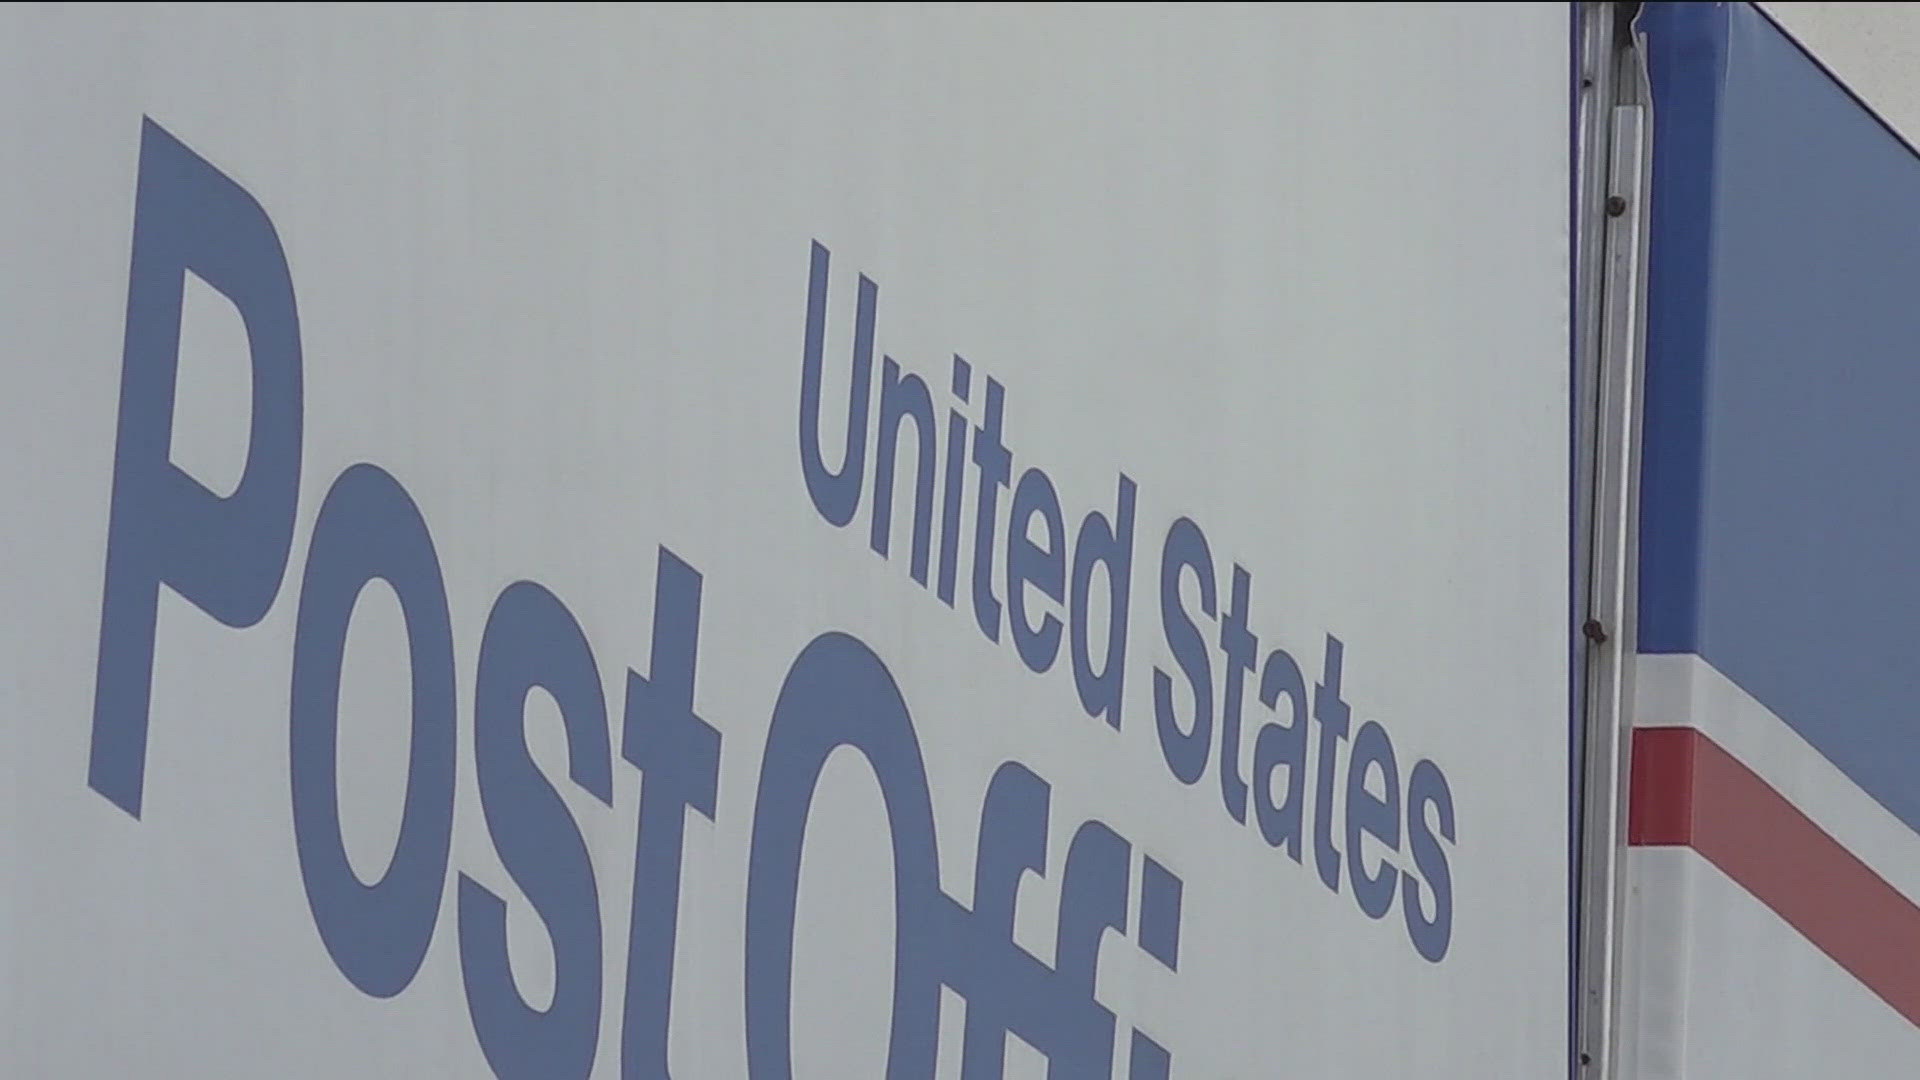 Sen. Jon Ossoff wrote a letter to Postmaster General Louis DeJoy asking for "the current on-time delivery statistics in the metro Atlanta area within one week."